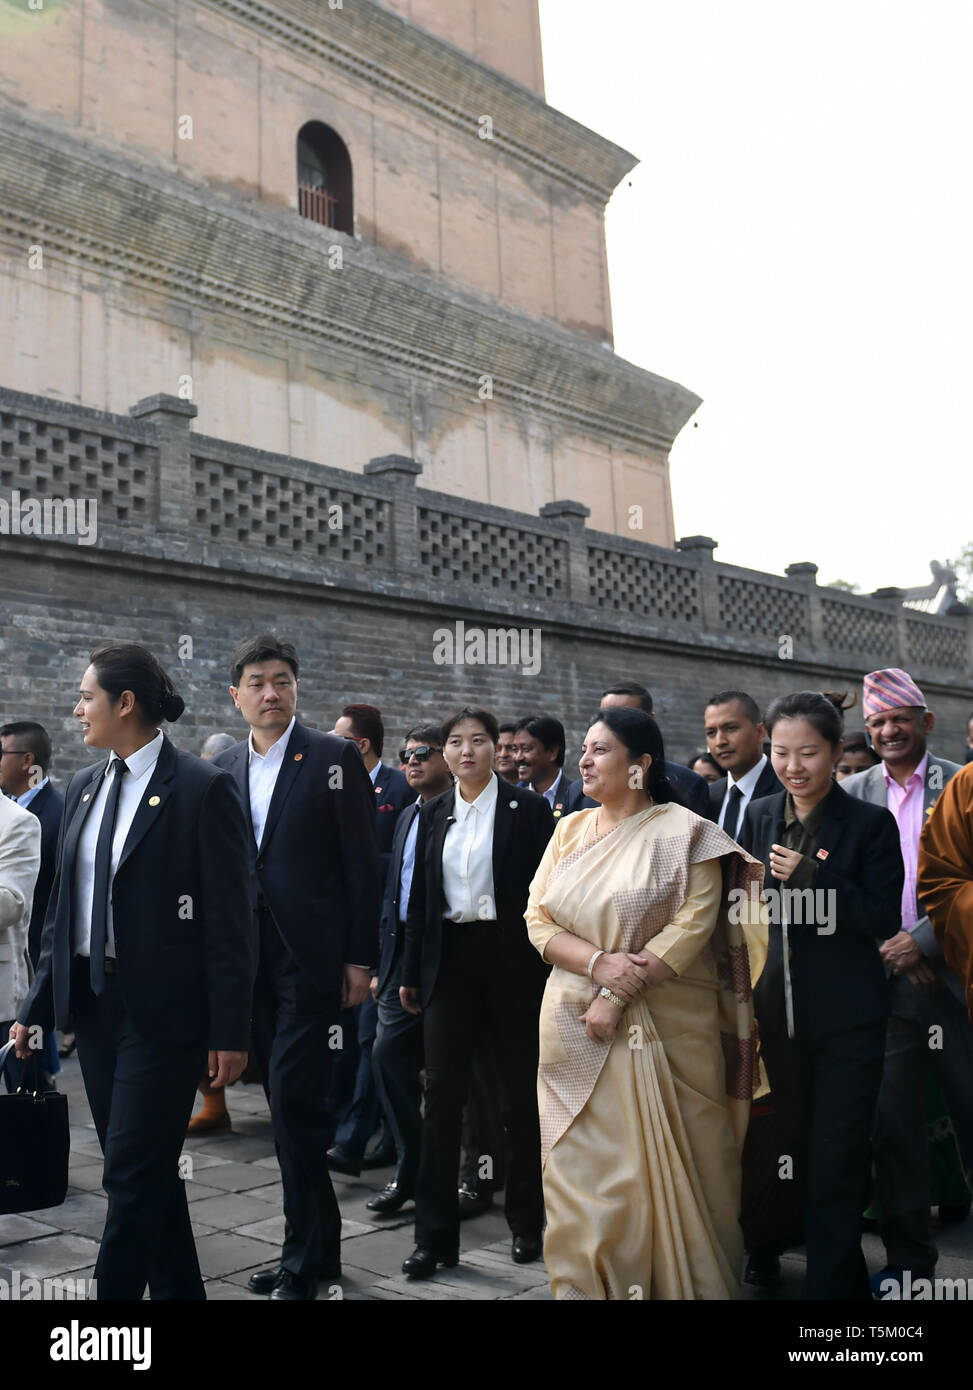 Xi'an, China's Shaanxi Province. 25th Apr, 2019. Nepali President Bidya Devi Bhandari visits the Da Ci'en Temple in Xi'an, northwest China's Shaanxi Province, April 25, 2019. Bhandari is in China for a state visit and to attend the Second Belt and Road Forum for International Cooperation. She will also attend the opening ceremony of the 2019 Beijing International Horticultural Exhibition. Credit: Li Yibo/Xinhua/Alamy Live News Stock Photo